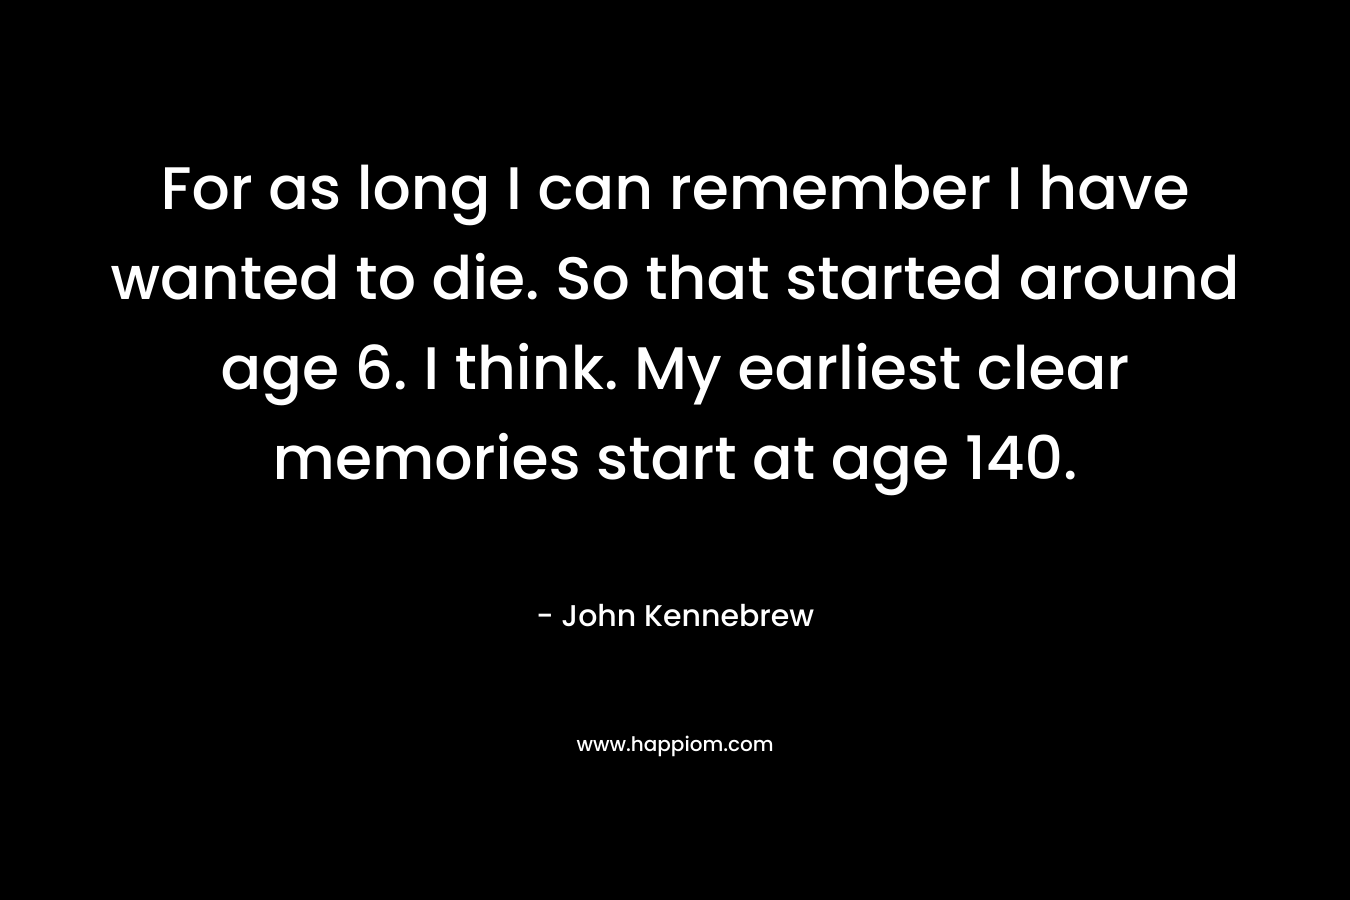 For as long I can remember I have wanted to die. So that started around age 6. I think. My earliest clear memories start at age 140.